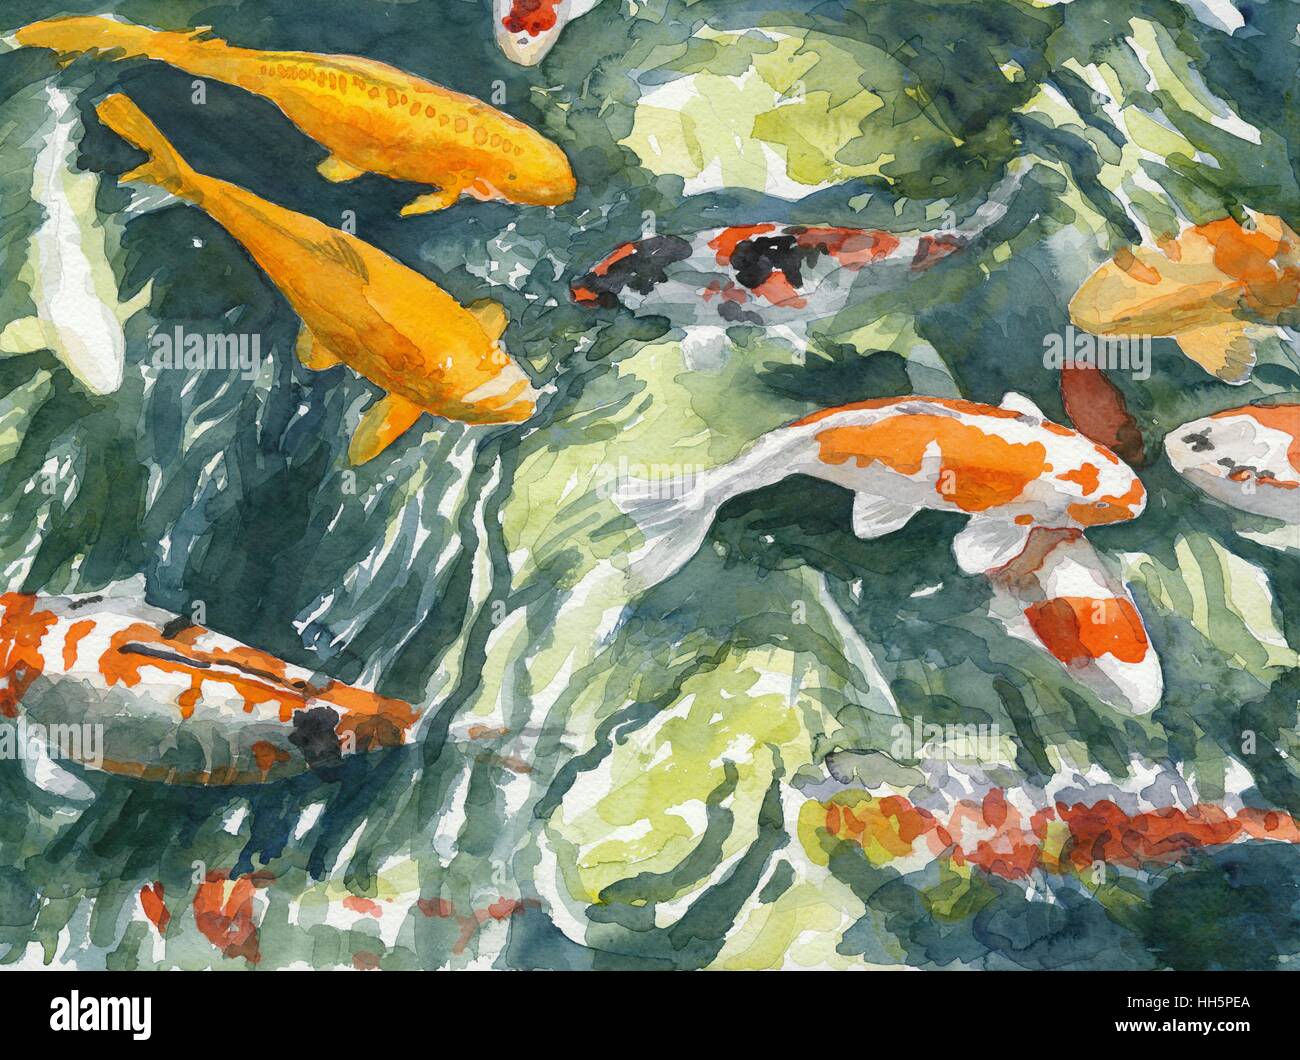 Koi Fish Watercolor Tutorial: How to Paint Vibrant Movement